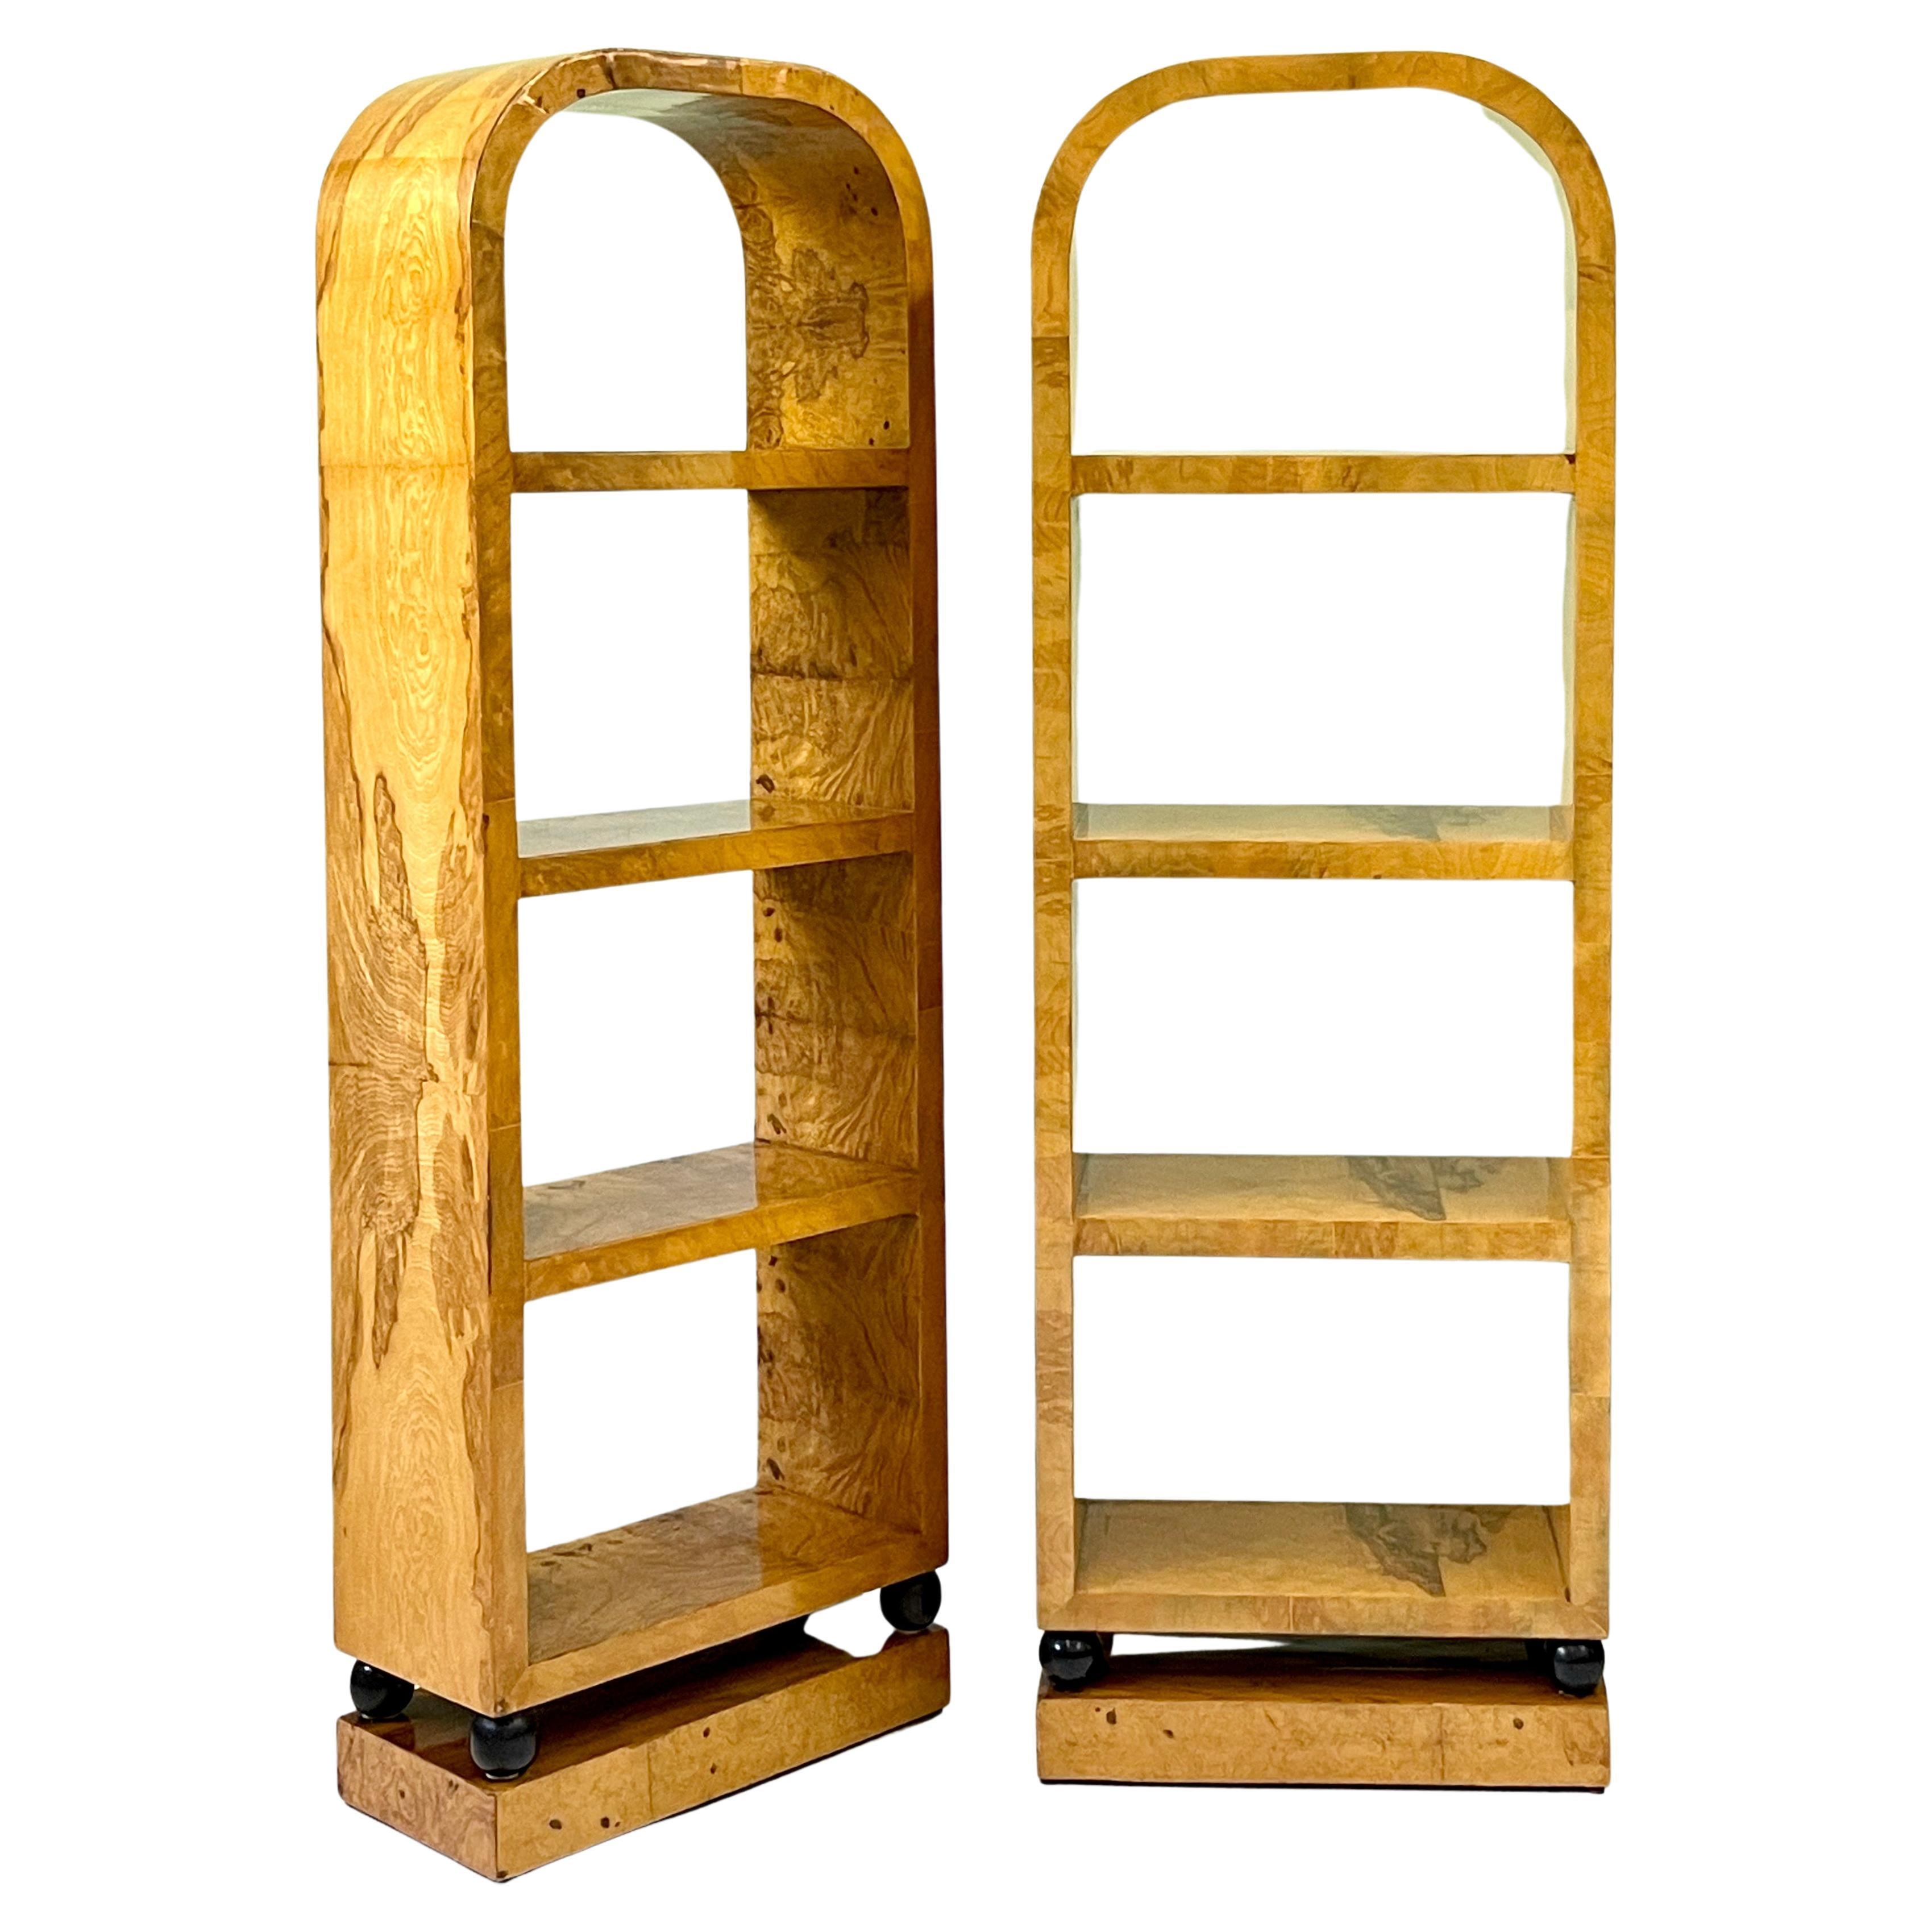 Wonderful pair of 20th Century Italian bookcases beautifully constructed of birch burl veneer in the style of Art Deco. The arched-top open bookcases are finished on all sides, contain three floating shelves, and are raised on ebonized spheres above